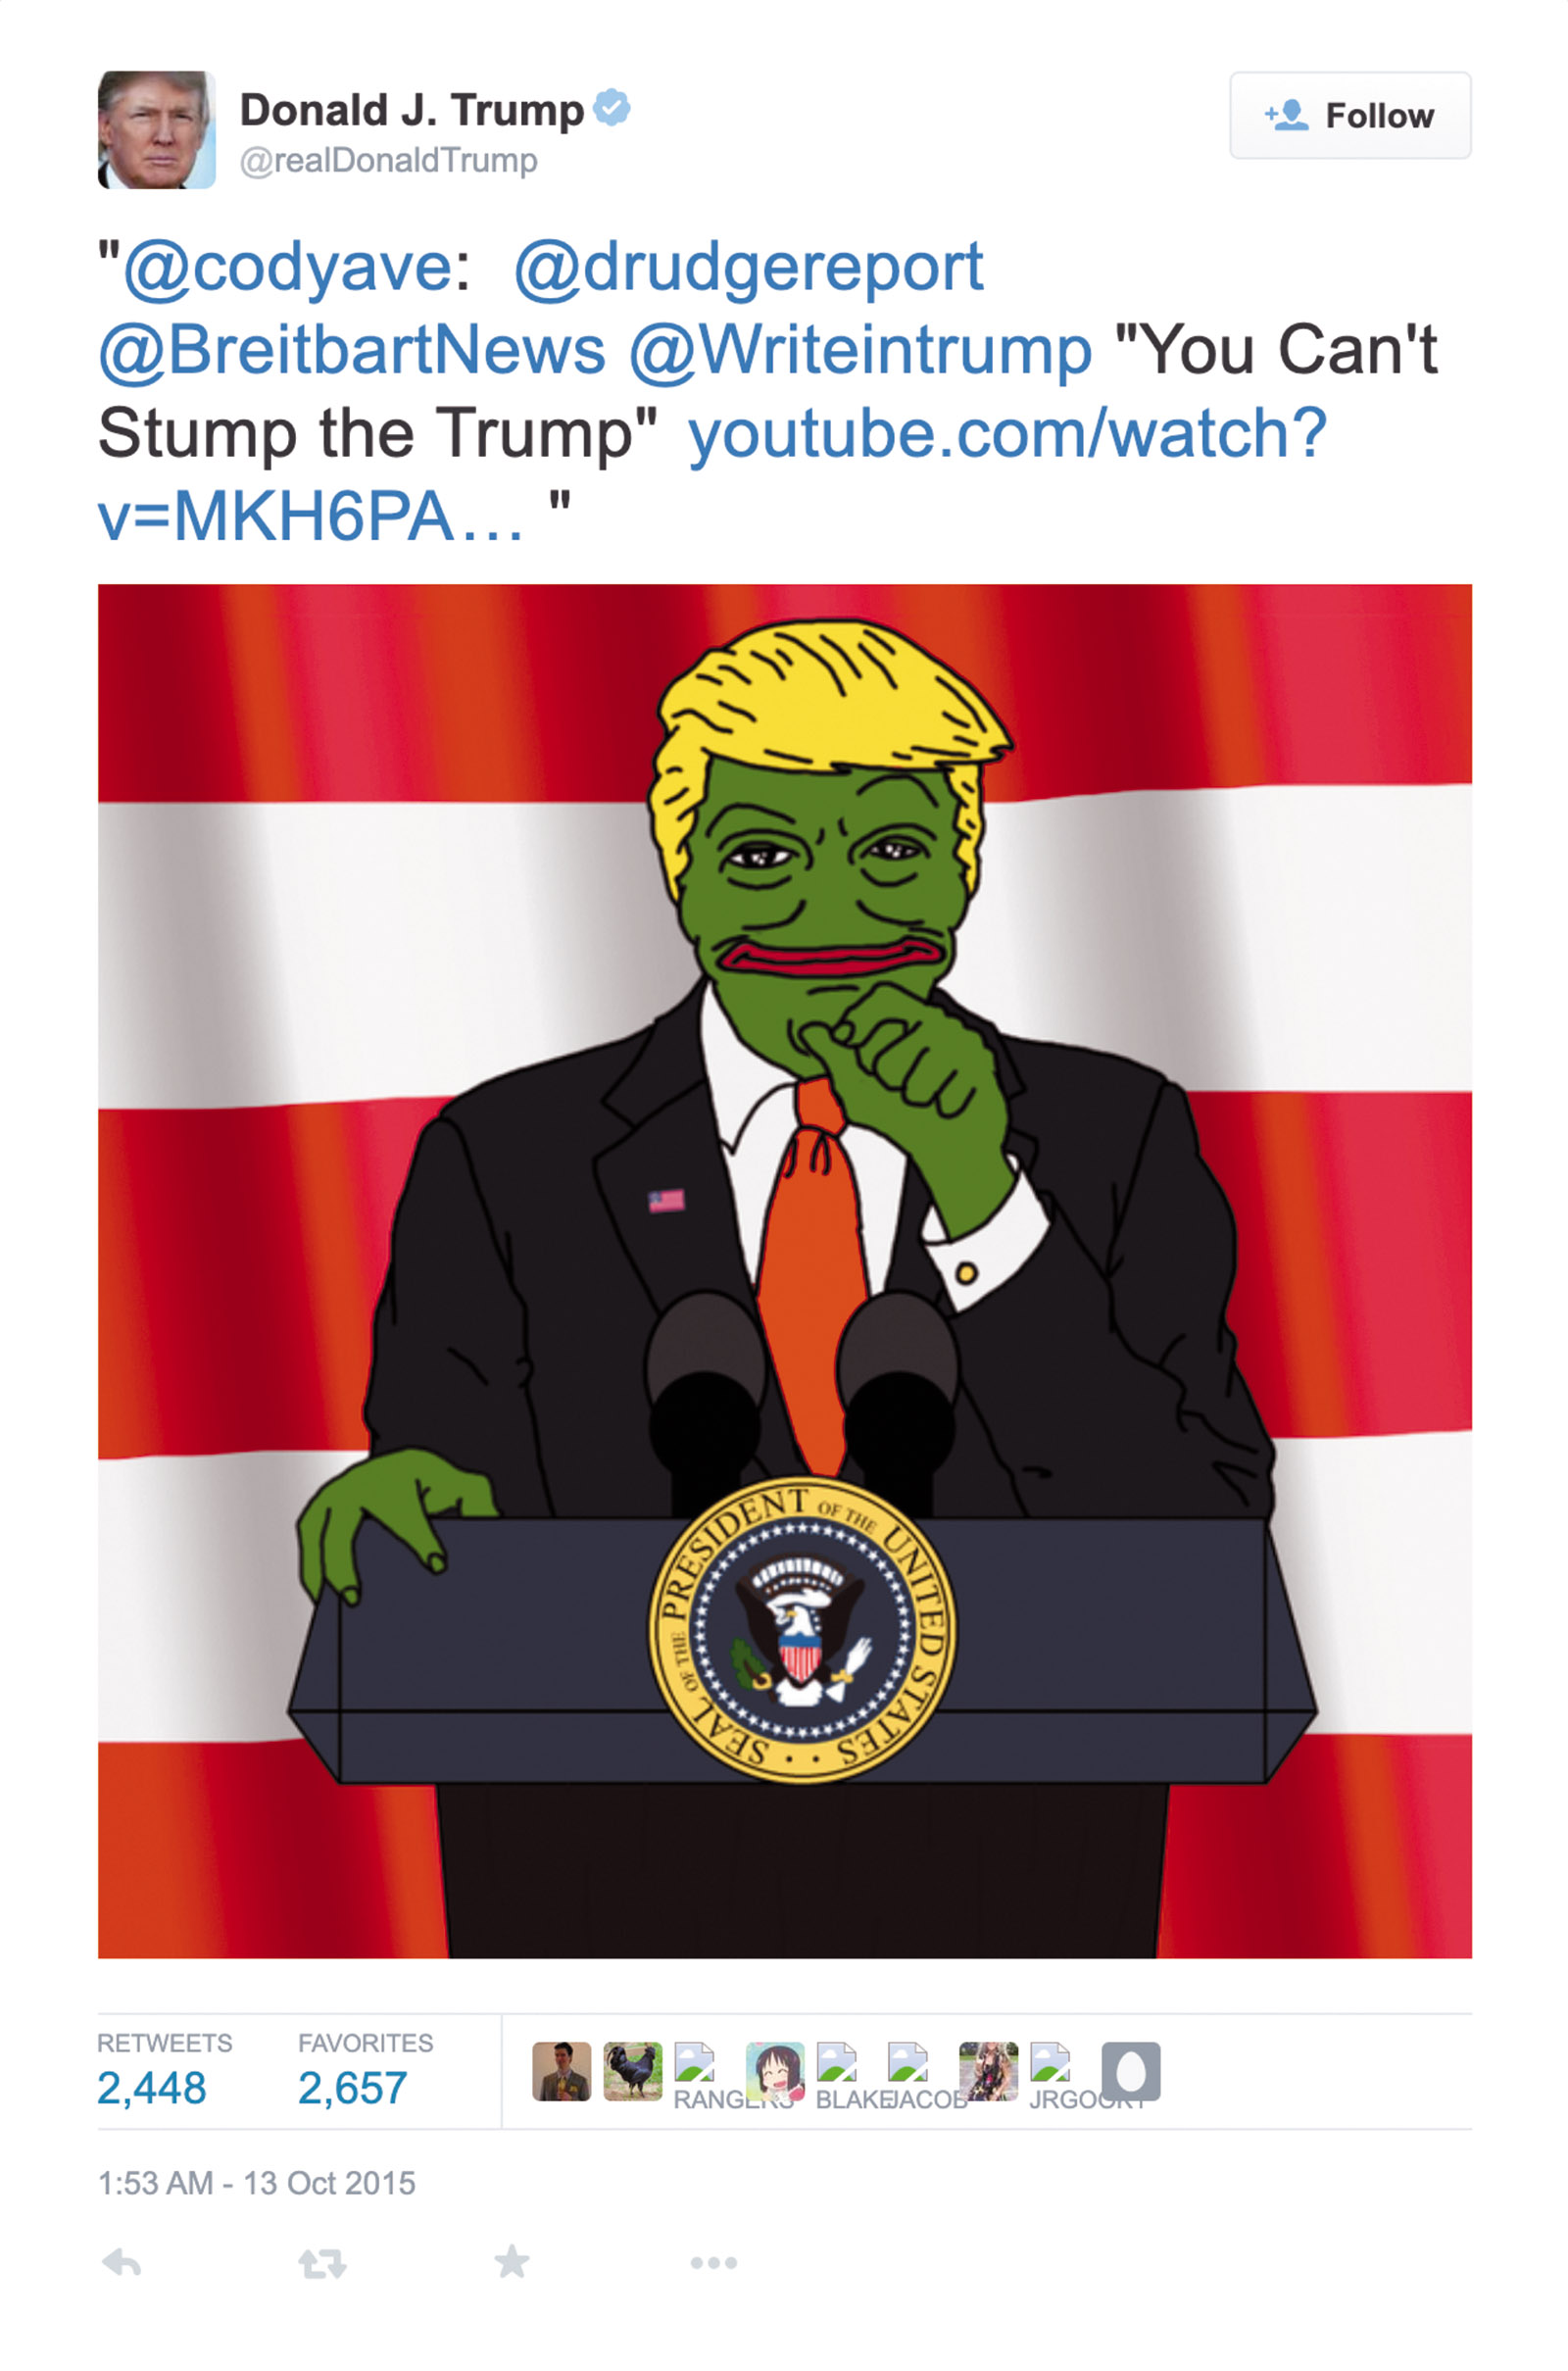 A tweet by Donald Trump featuring an image of himself as Pepe the Frog